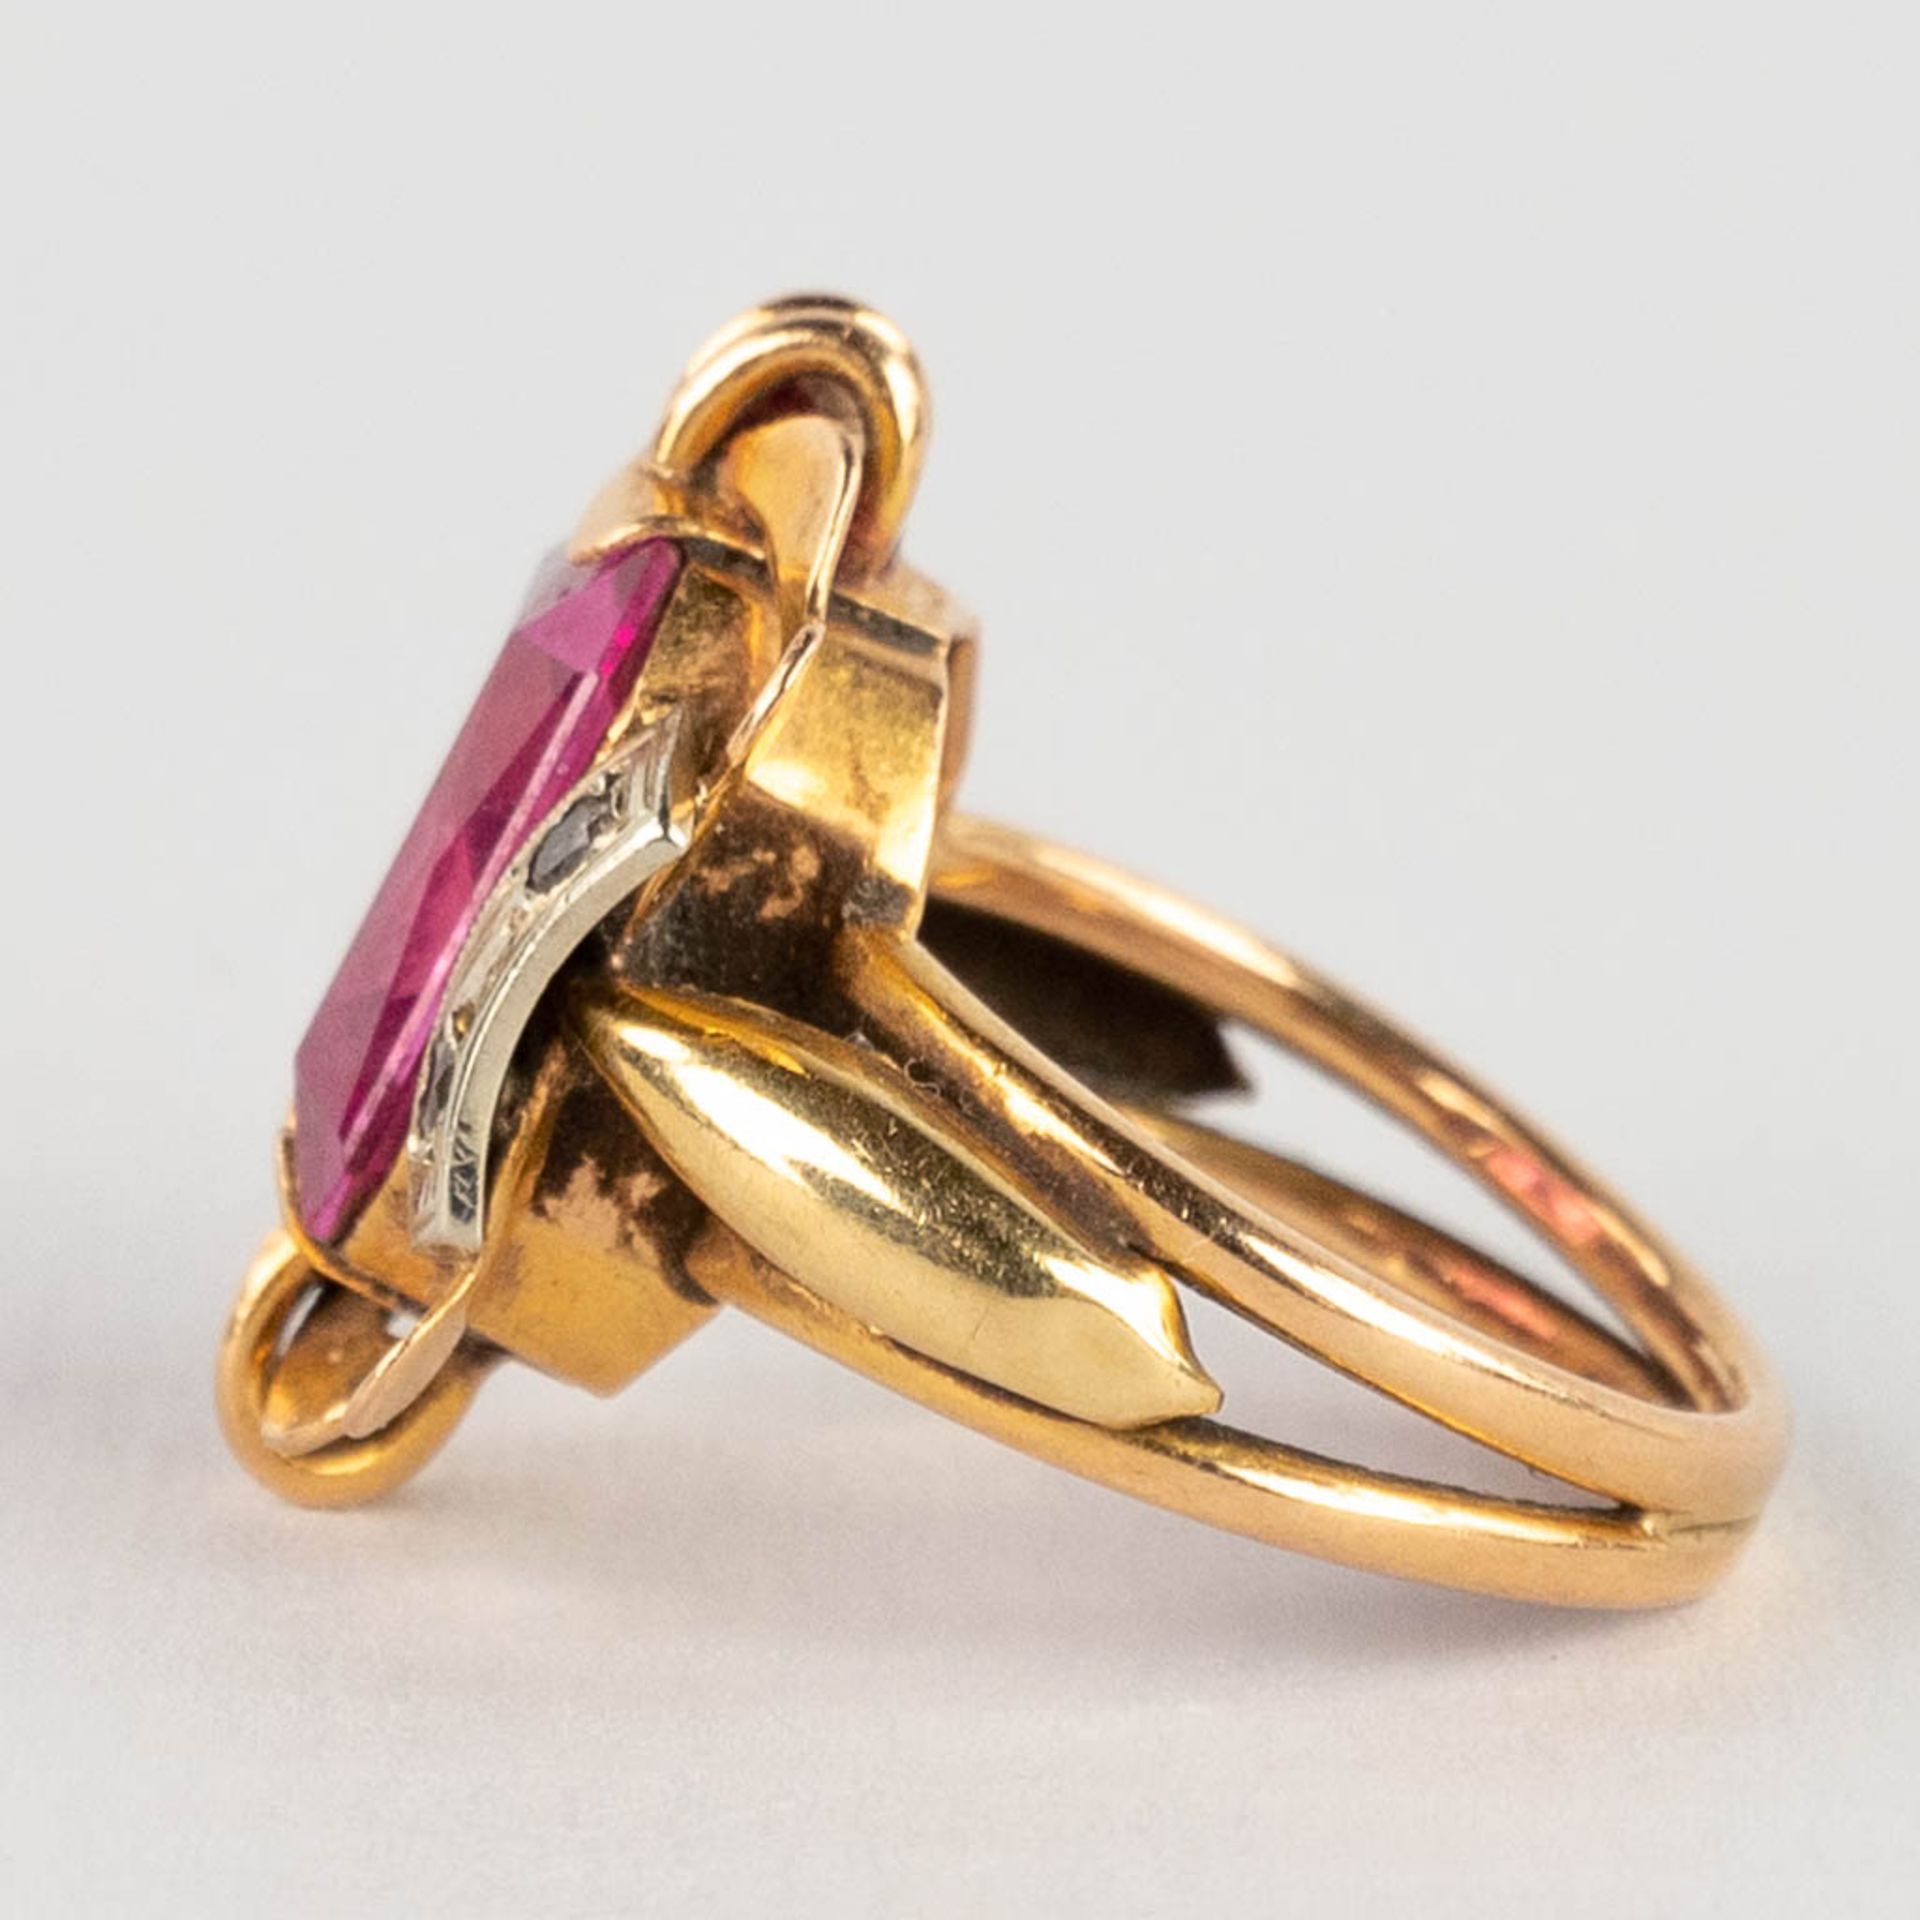 A yellow gold ring with a cut light purple stone/glass. 6,87g. Ring size: 52. - Image 5 of 9